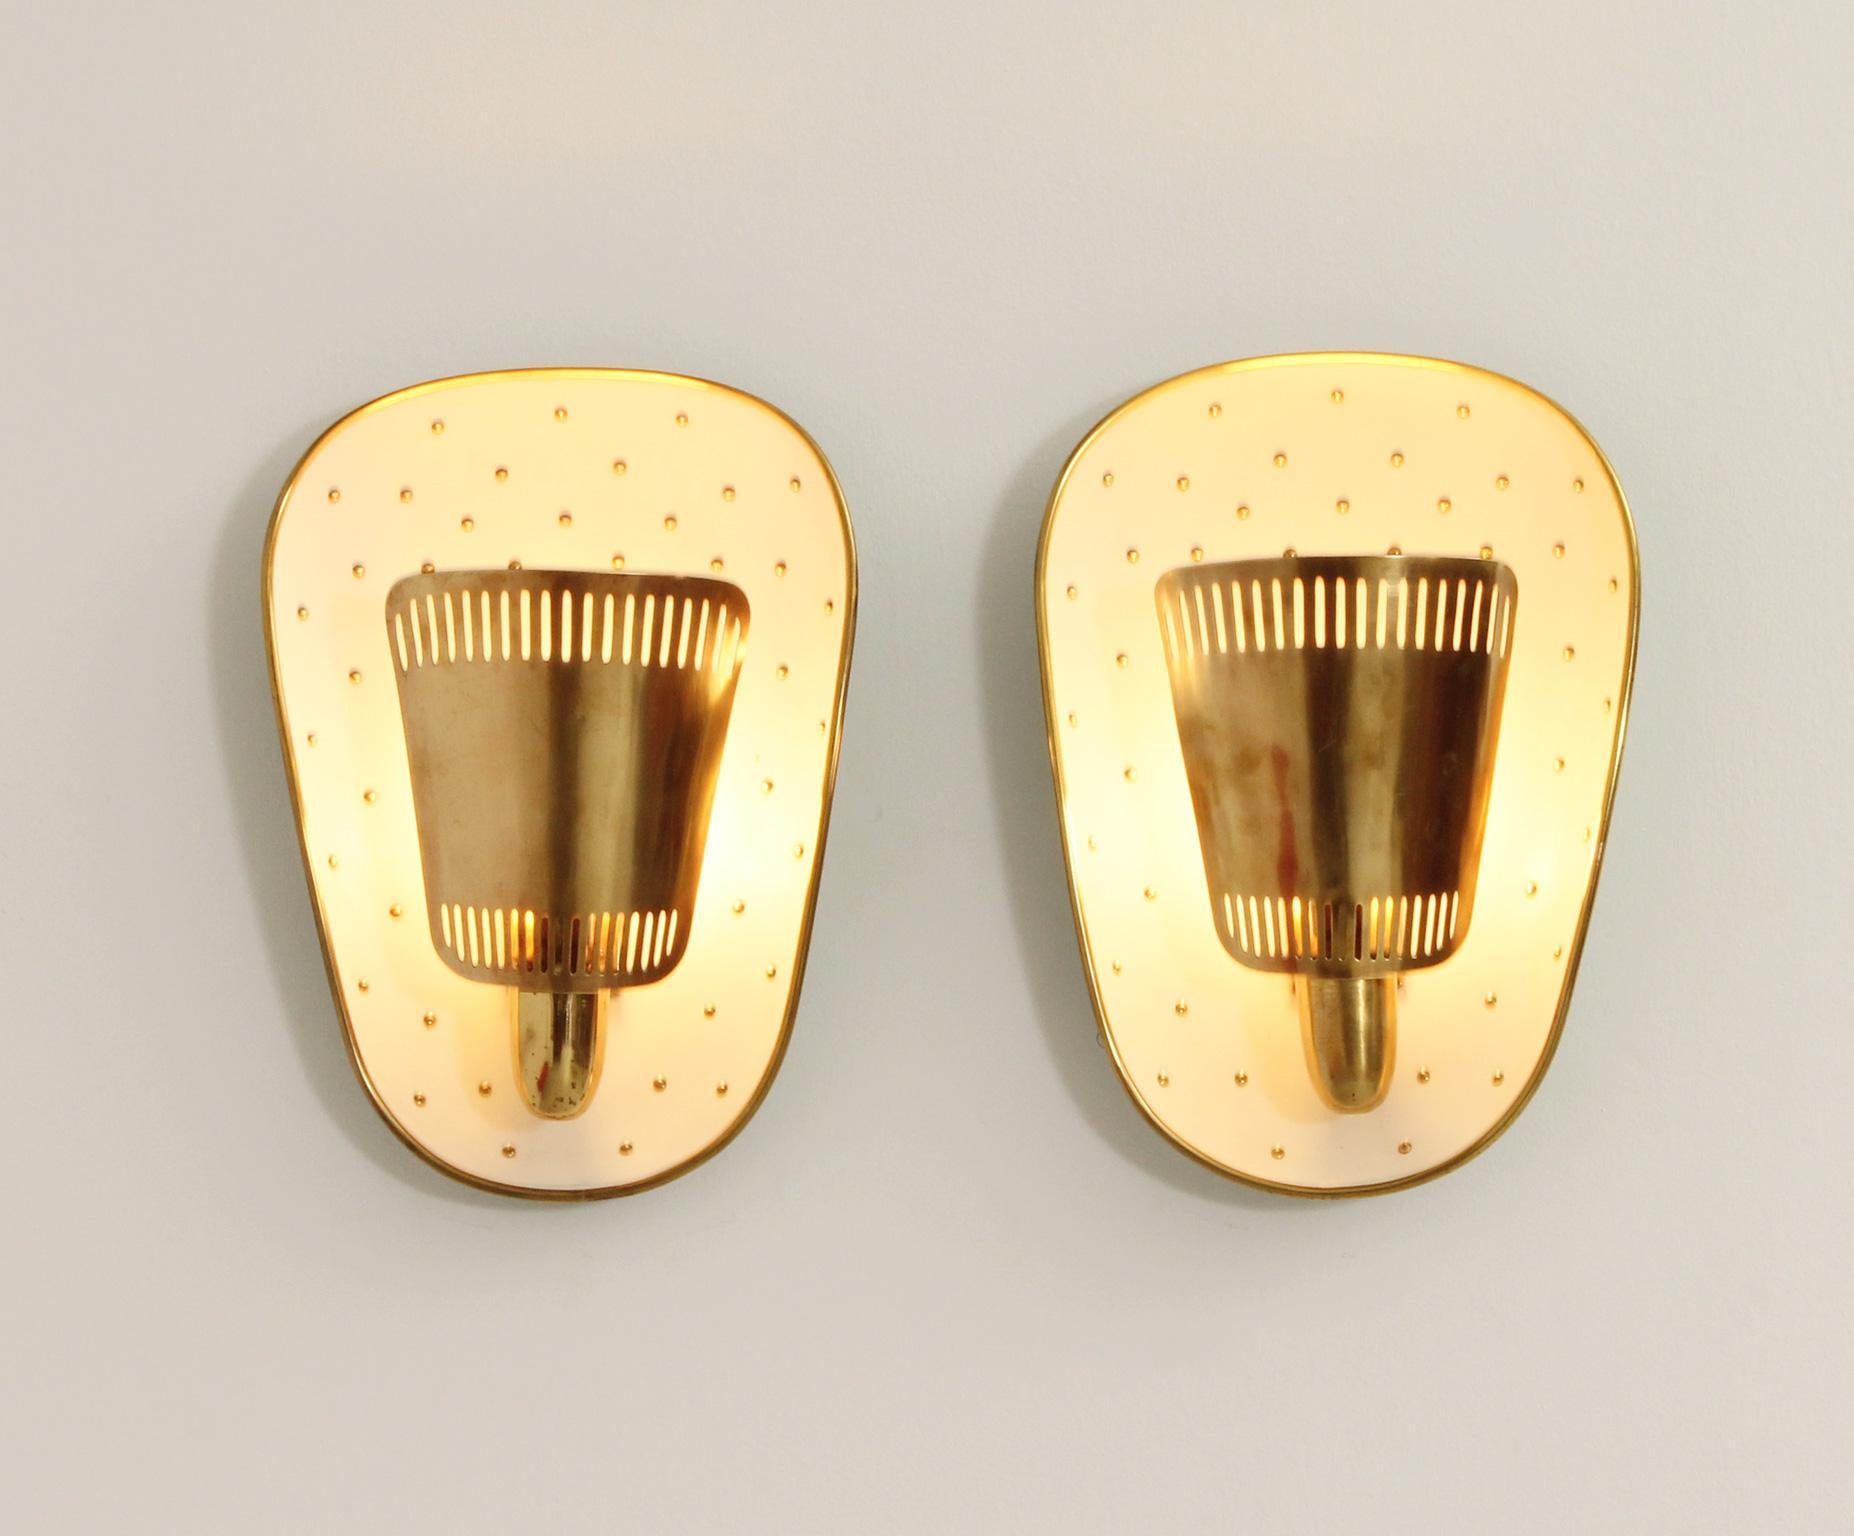 Large Midcentury Sconces Attributed to Hillebrand, Germany, 1950s For Sale 8